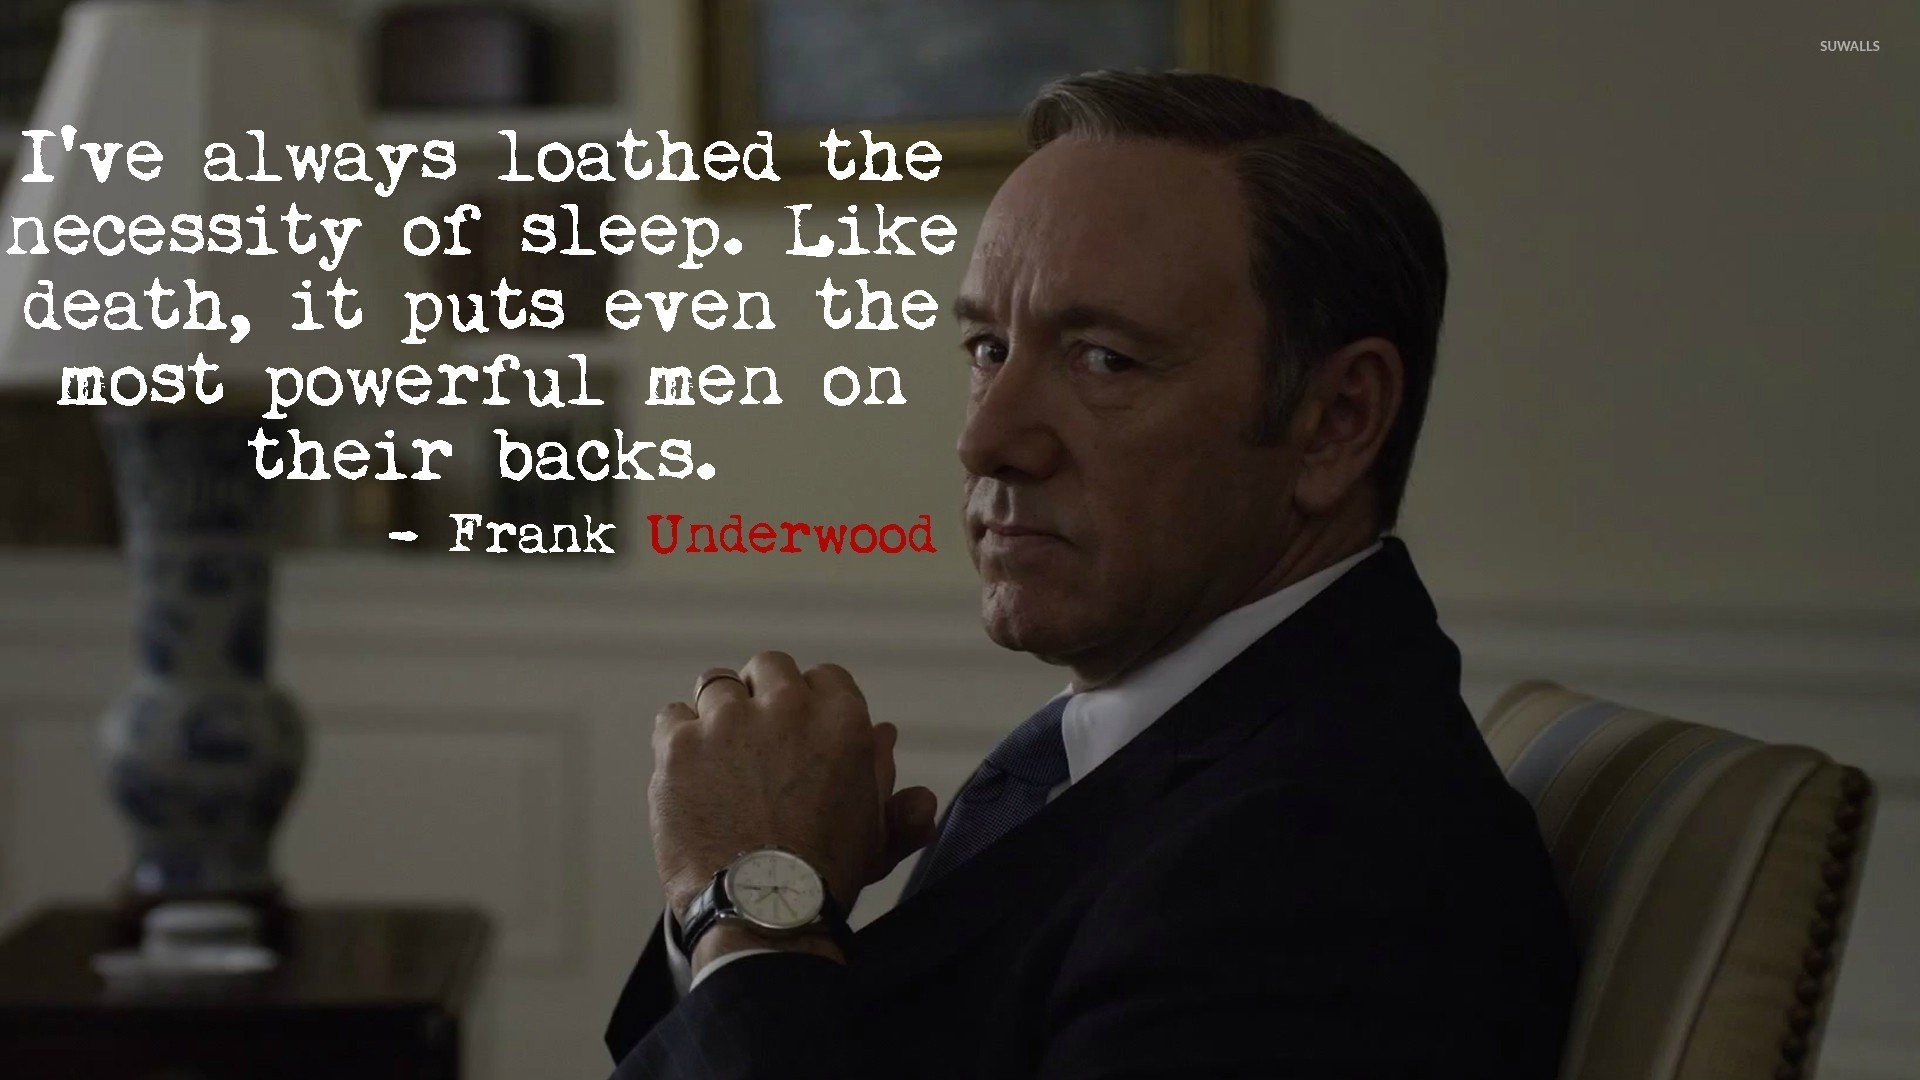 Frank Underwood   House of Cards wallpaper   Quote wallpapers   28801 1920x1080